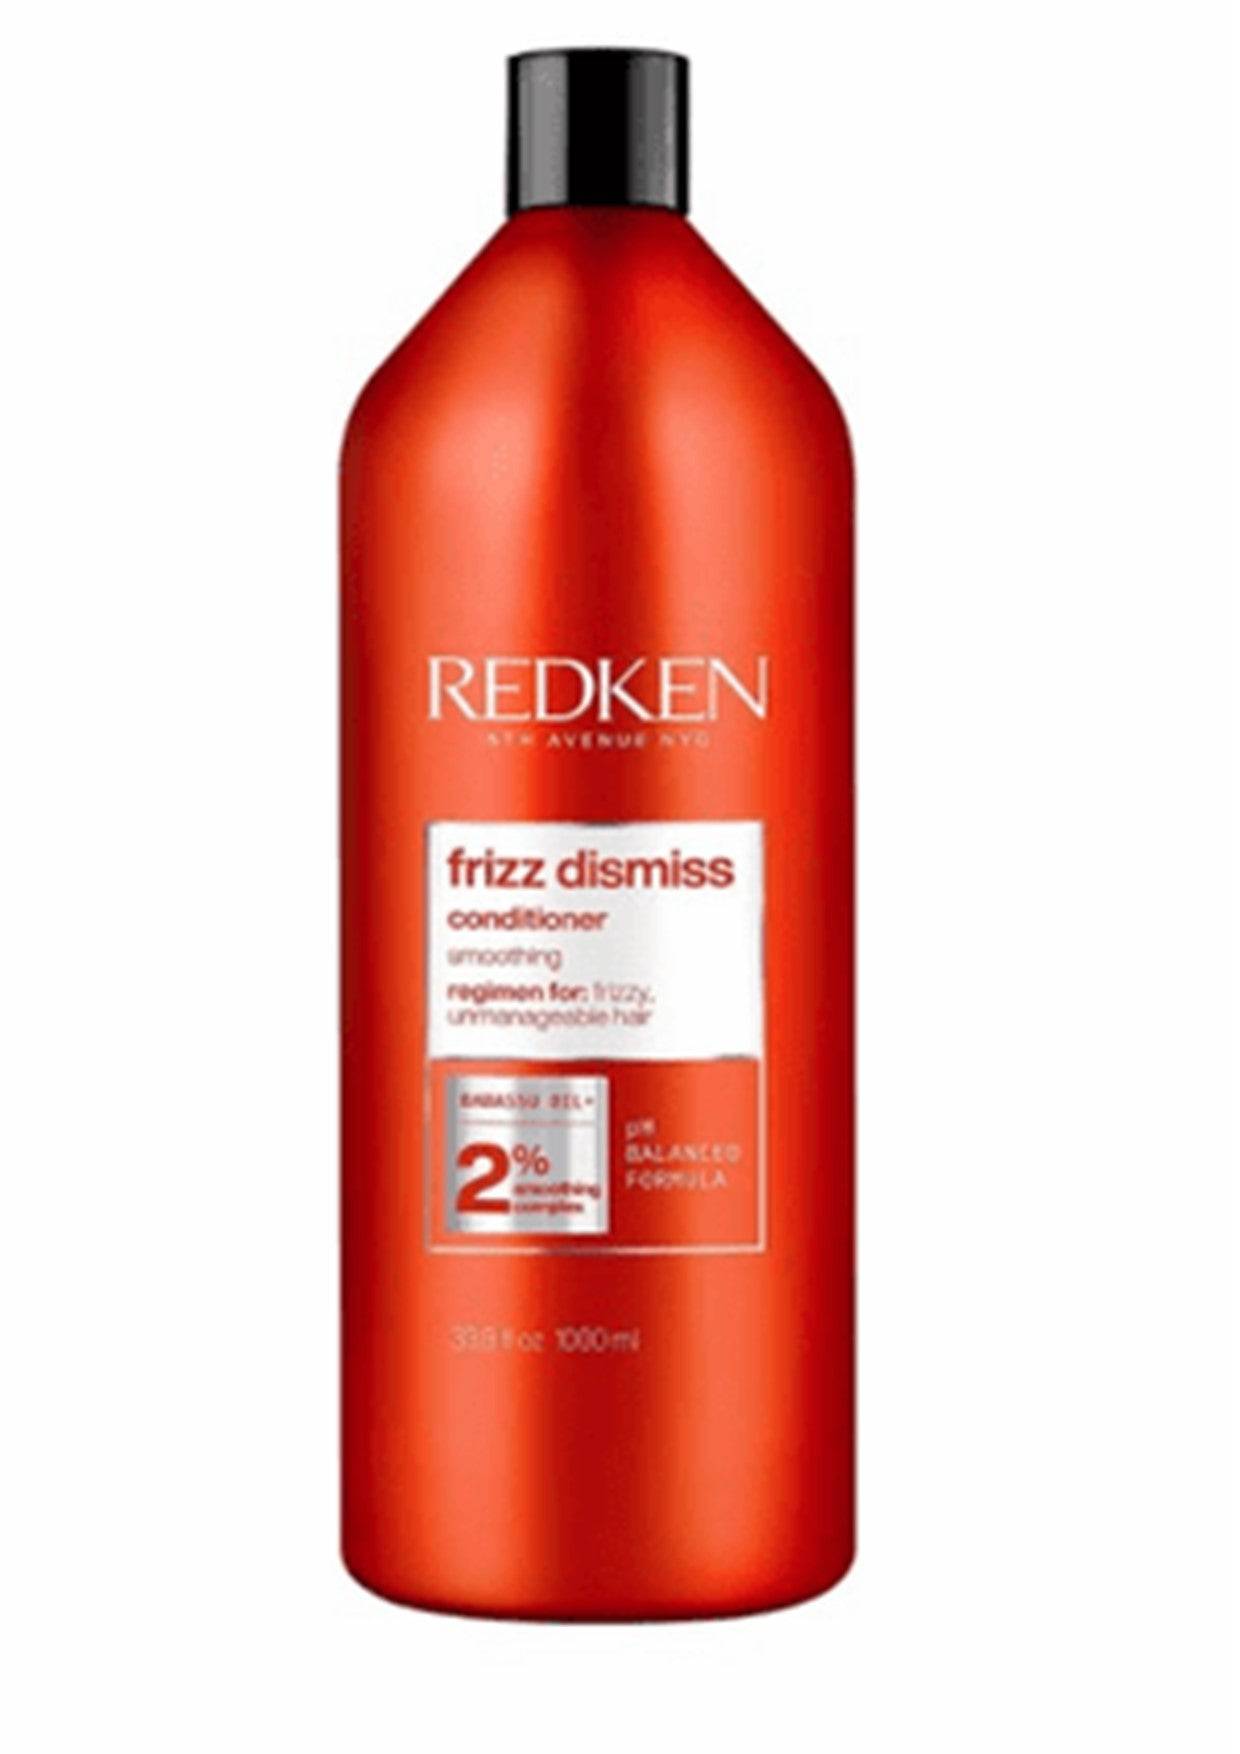 REDKEN Frizz Dismiss Conditioner 1lt for humidity protection and Smoothing - On Line Hair Depot